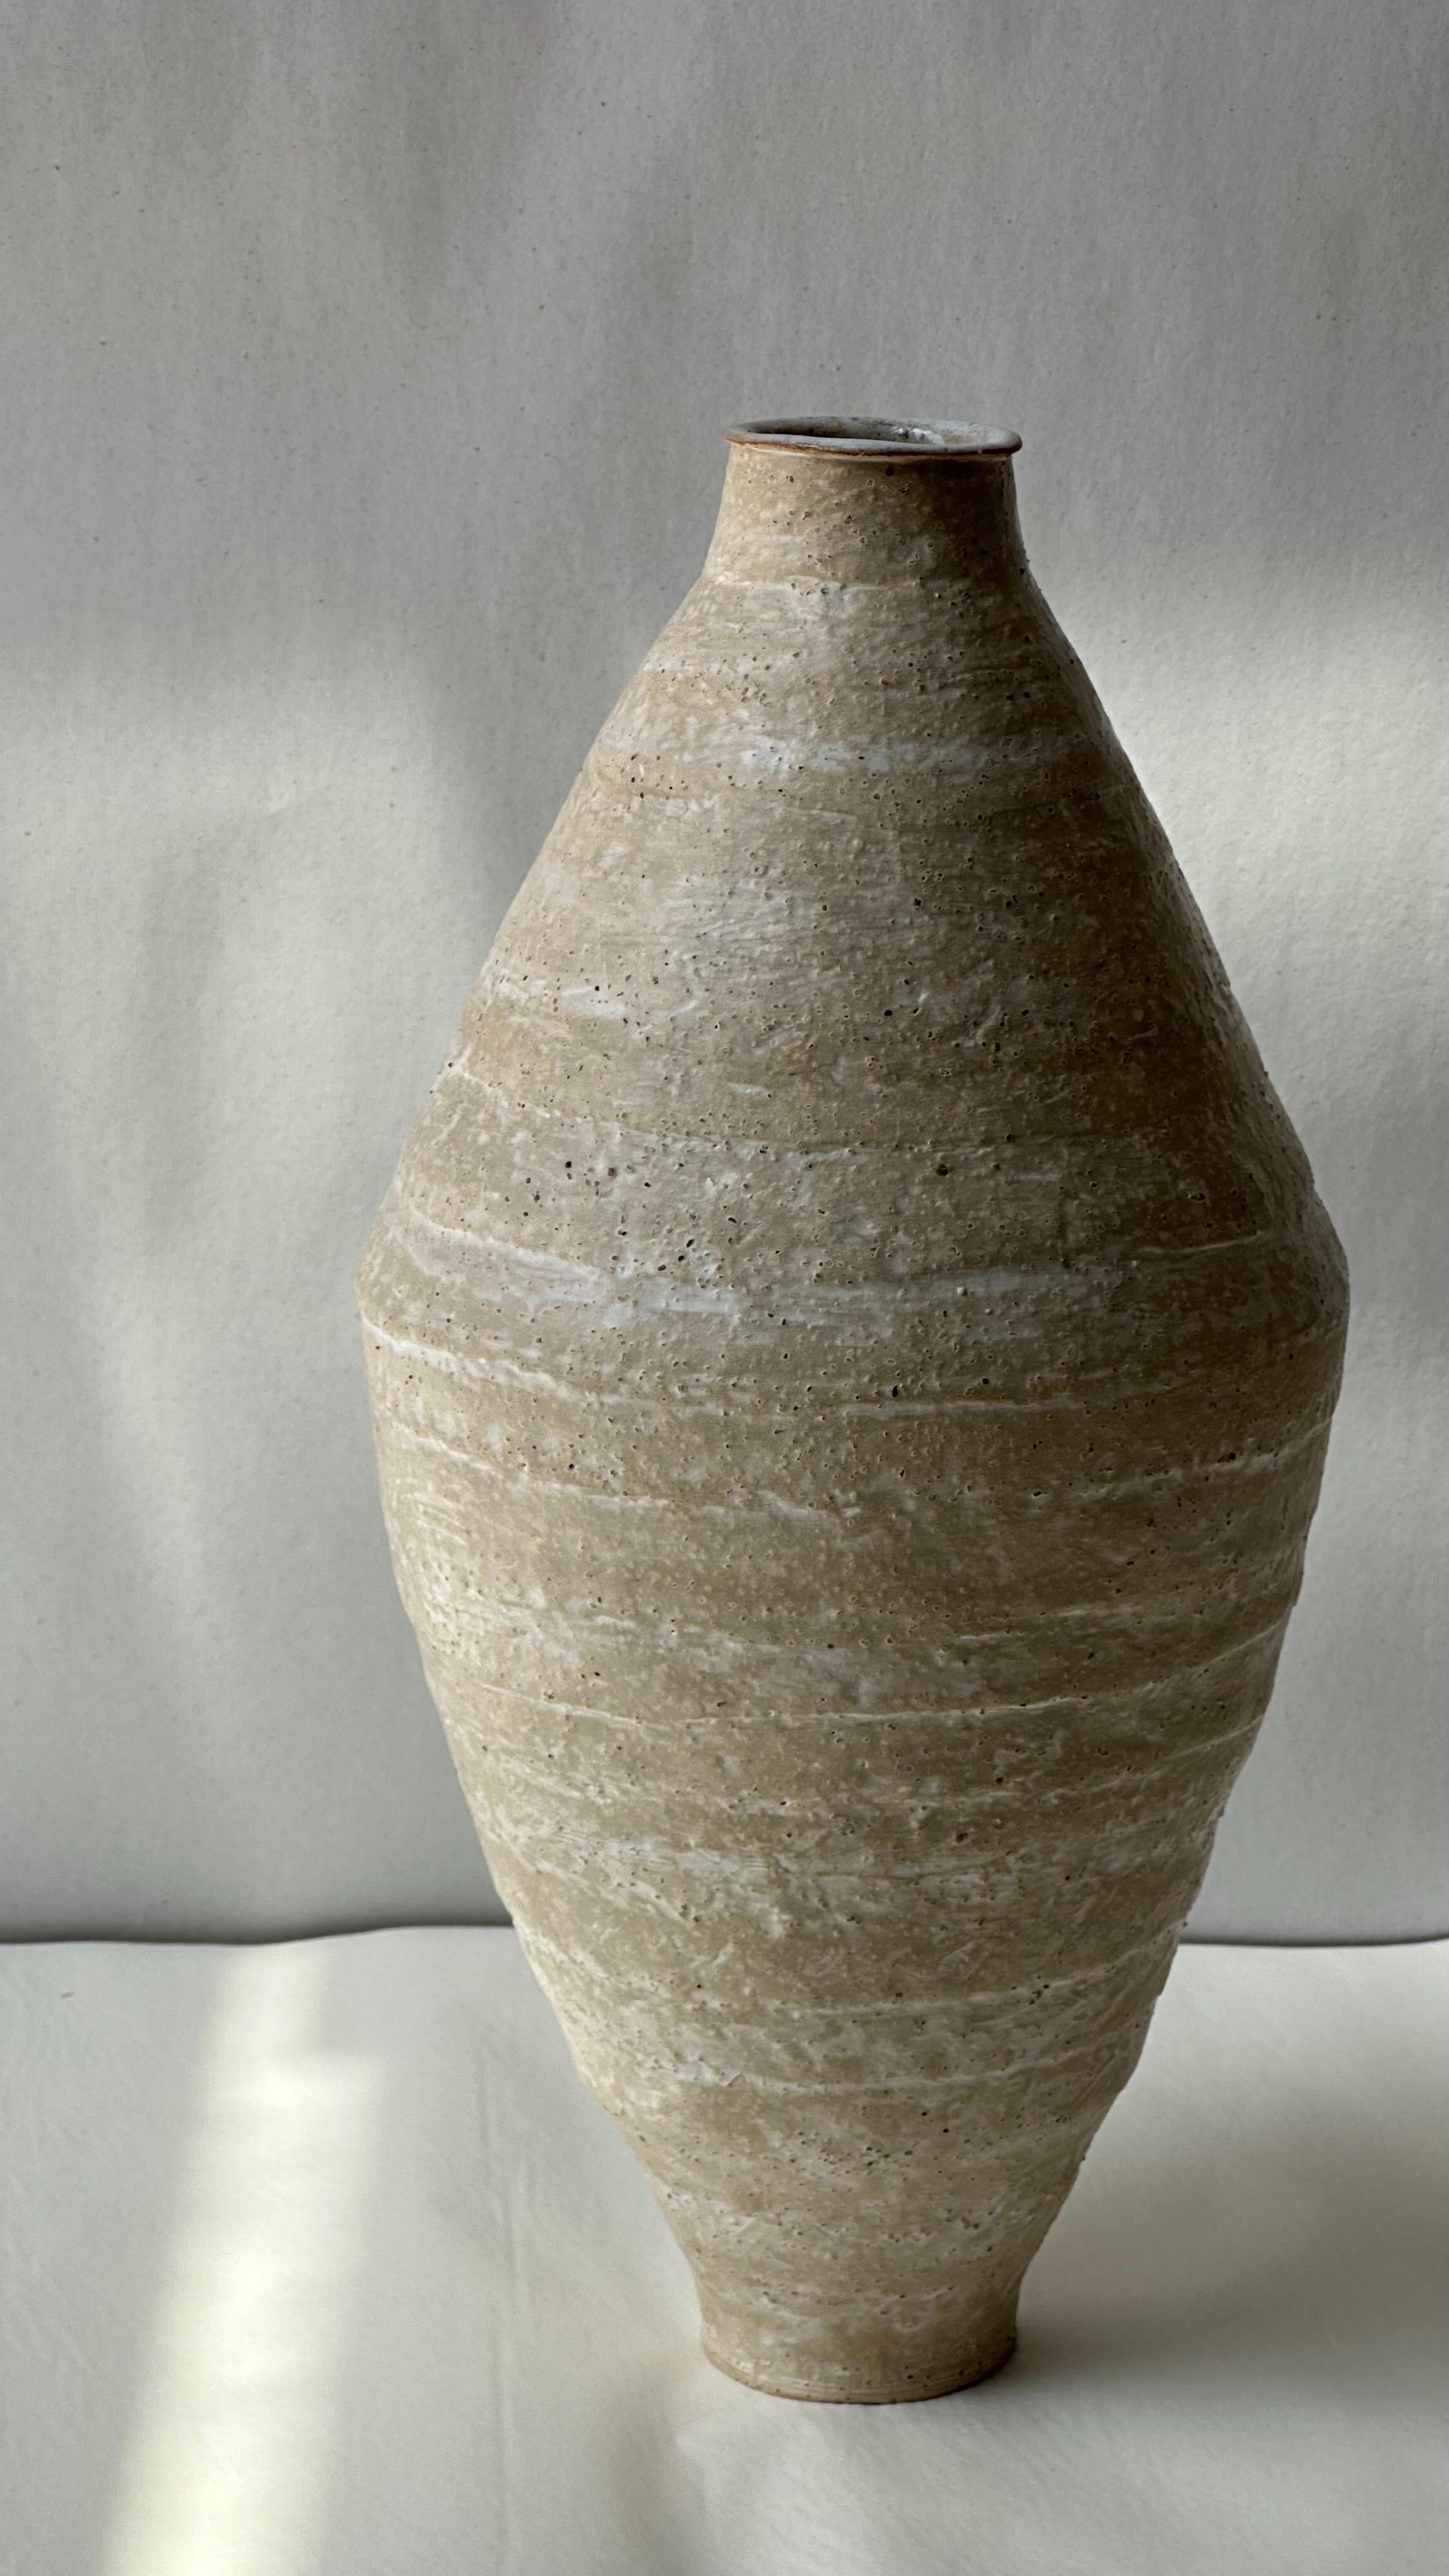 Beige Stoneware Amphora Vase by Elena Vasilantonaki
Unique
Dimensions: ⌀ 16 x H 36 cm (Dimensions may vary)
Materials: Stoneware
Available finishes: Black, Beige, Brown, Red, Terracotta, White Patina

Growing up in Greece I was surrounded by pottery